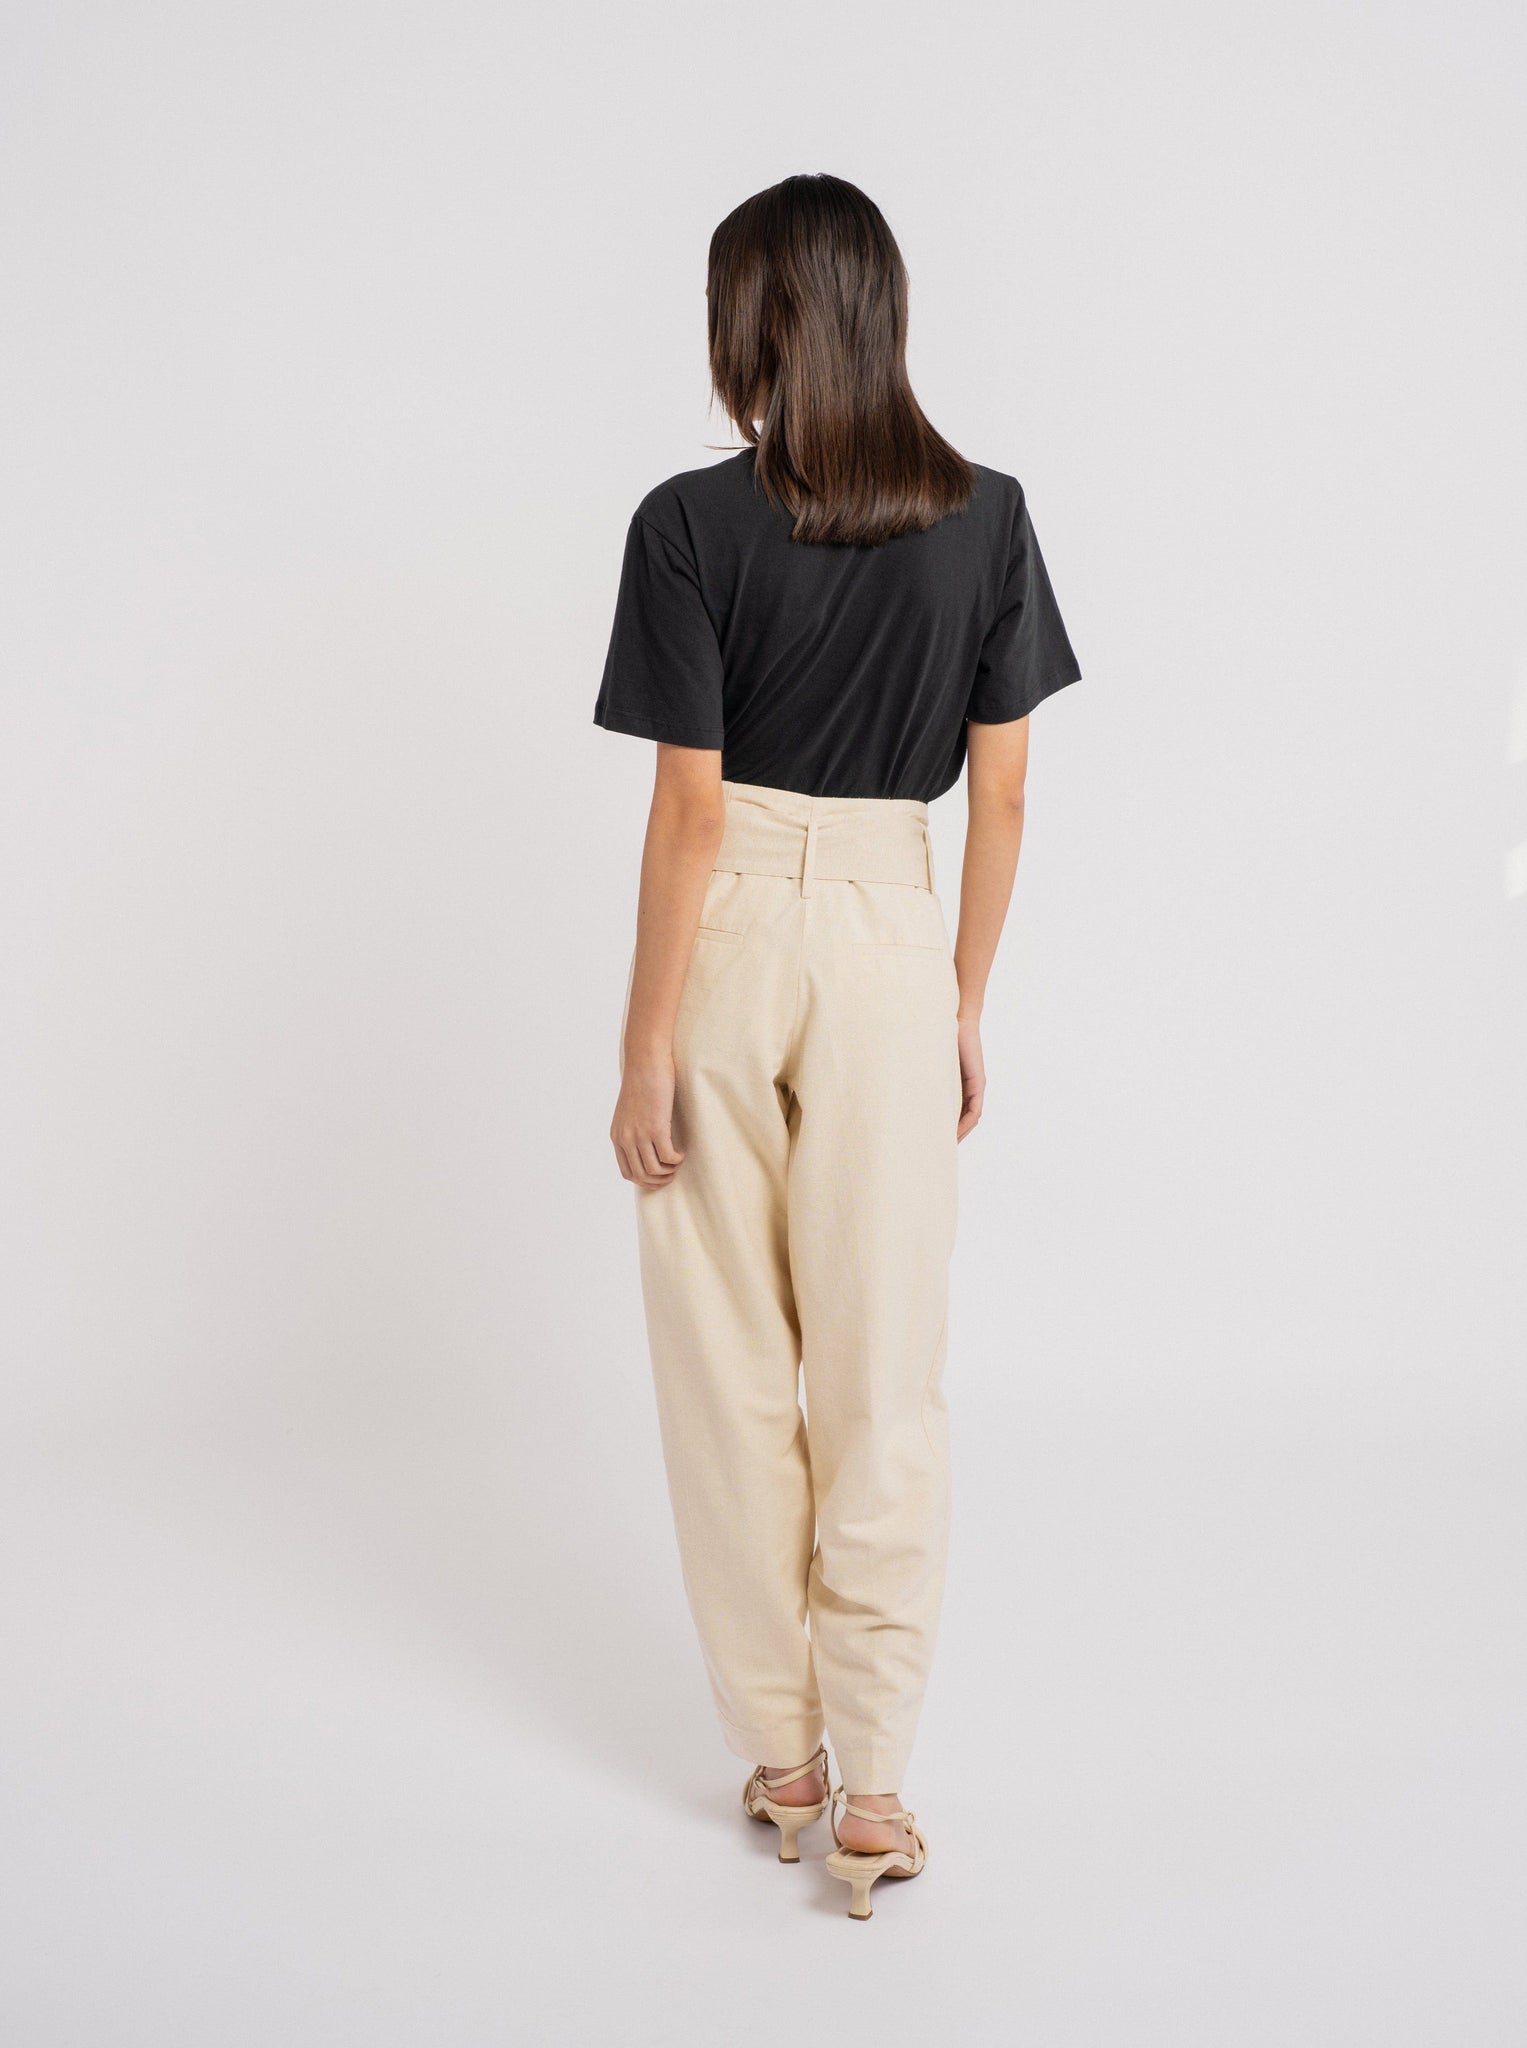 The back view of a woman wearing a Traveler Pant - Ecru Silk Noil - Sample and beige trousers.